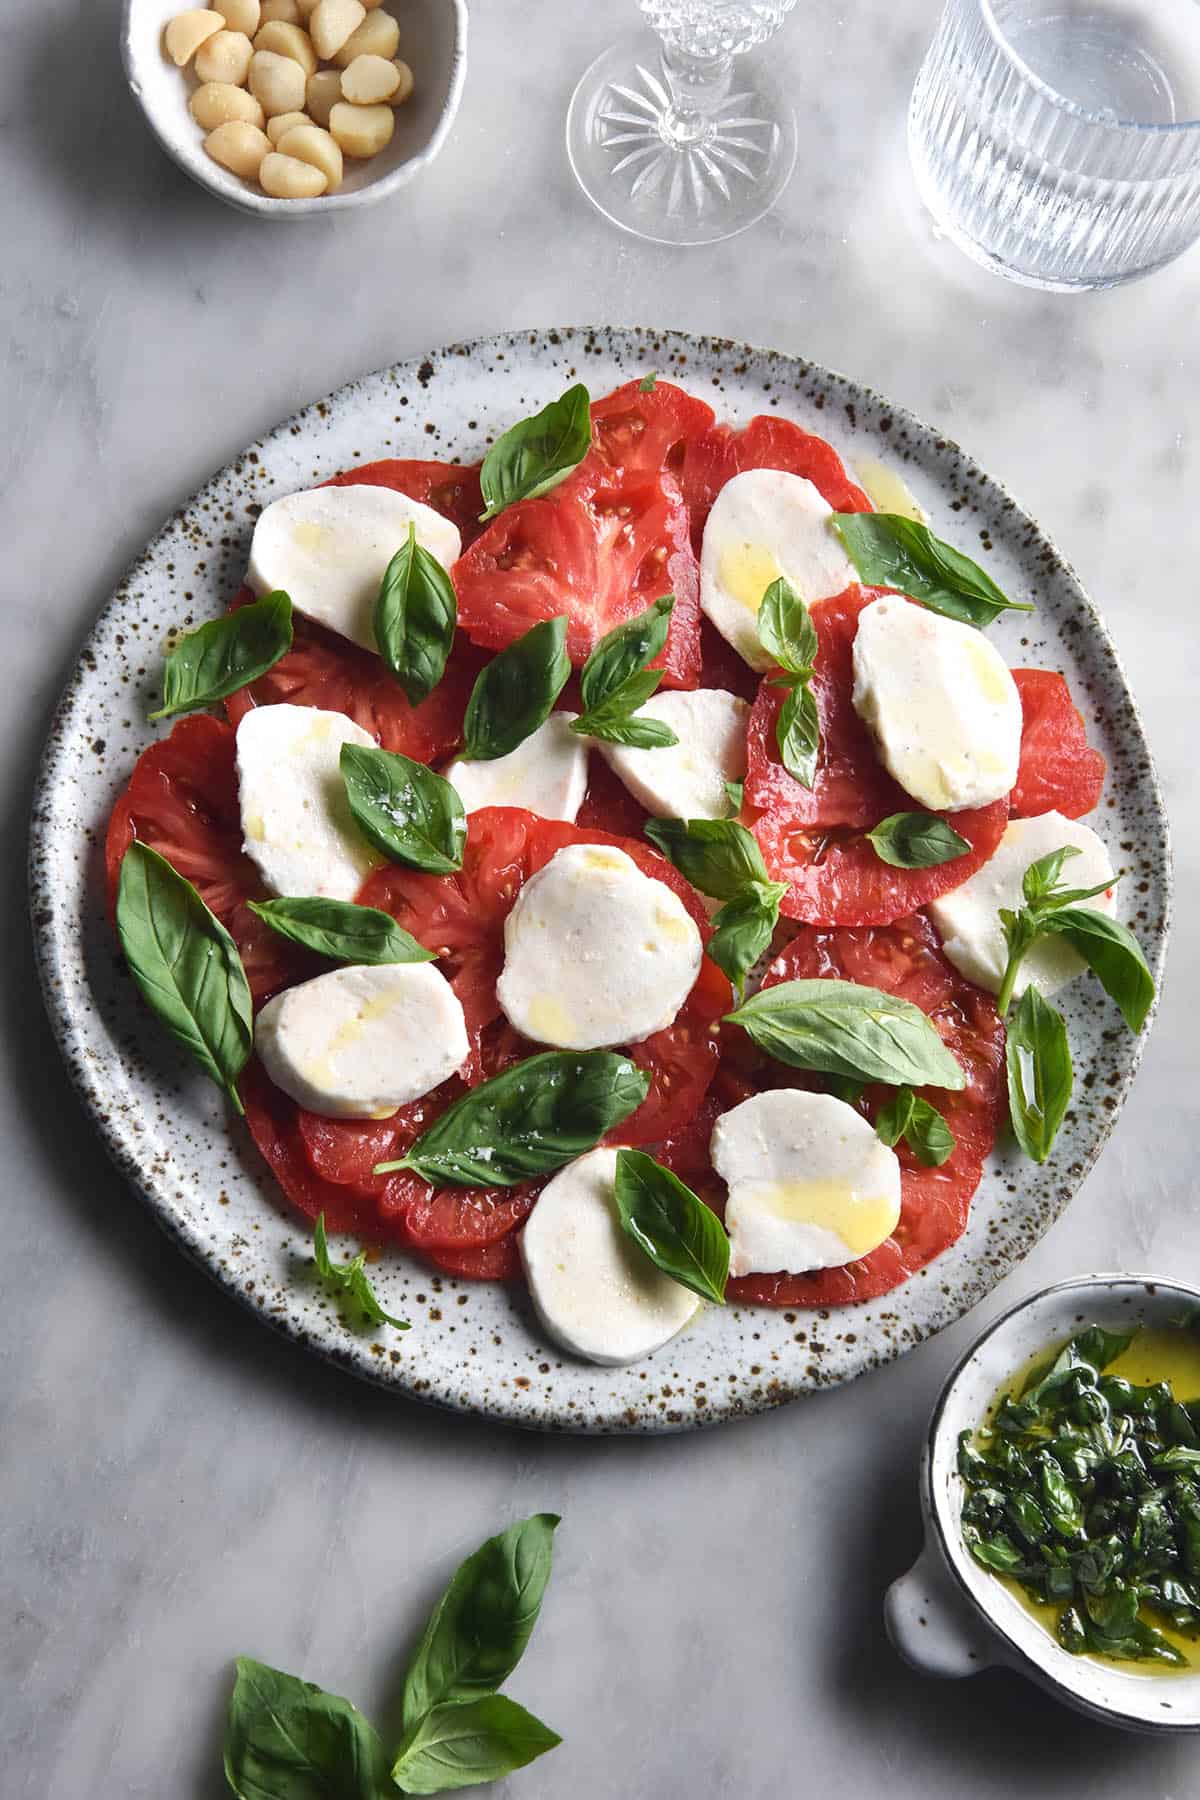 An aerial image of a caprese salad on a white marble table. The caprese is surrounded by extra tomatoes, basil and water glasses. The mozzarella used in the salad is vegan mozzarella made from macadamias.